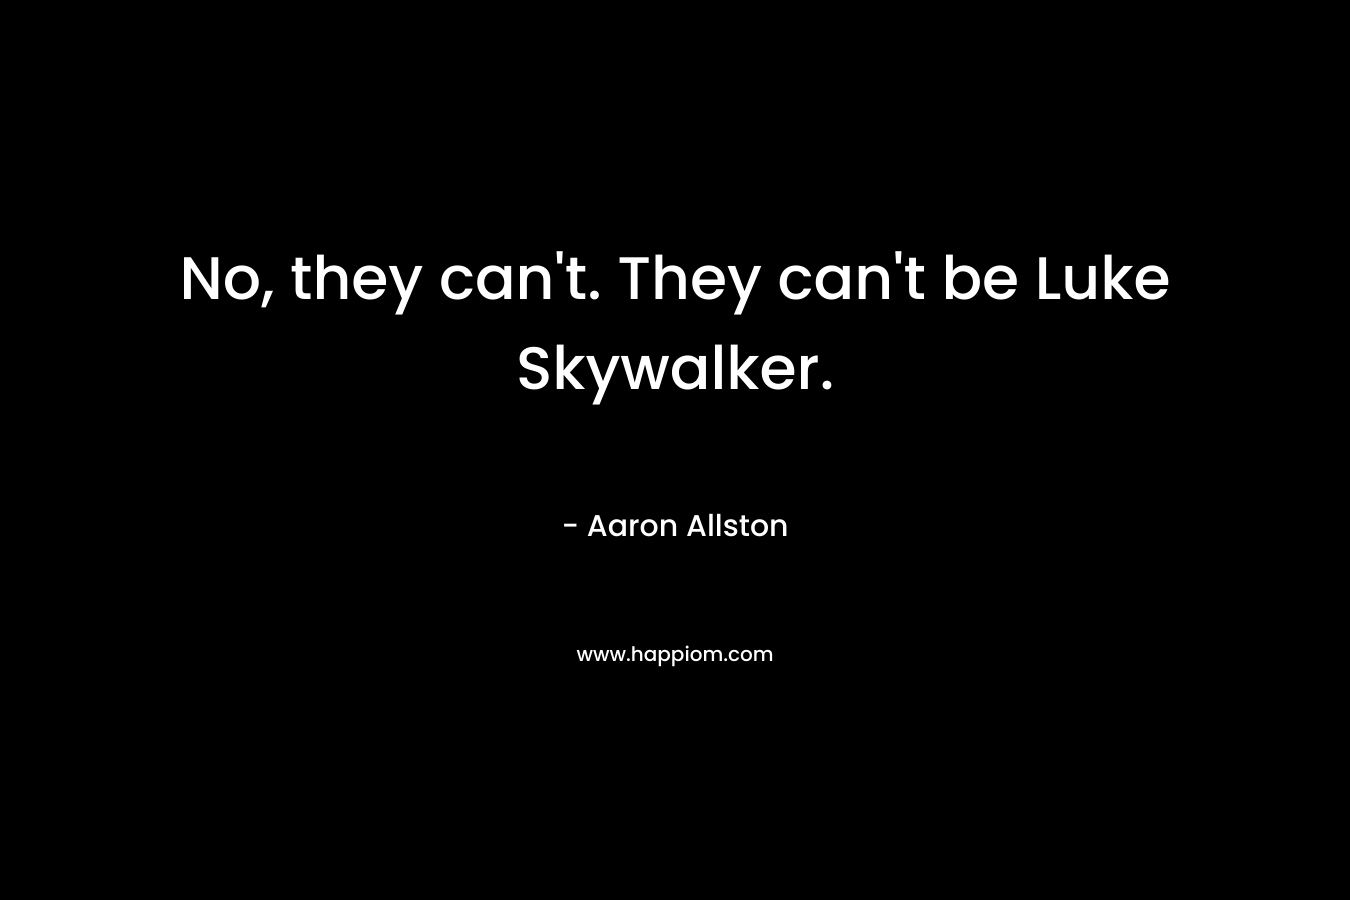 No, they can’t. They can’t be Luke Skywalker. – Aaron Allston